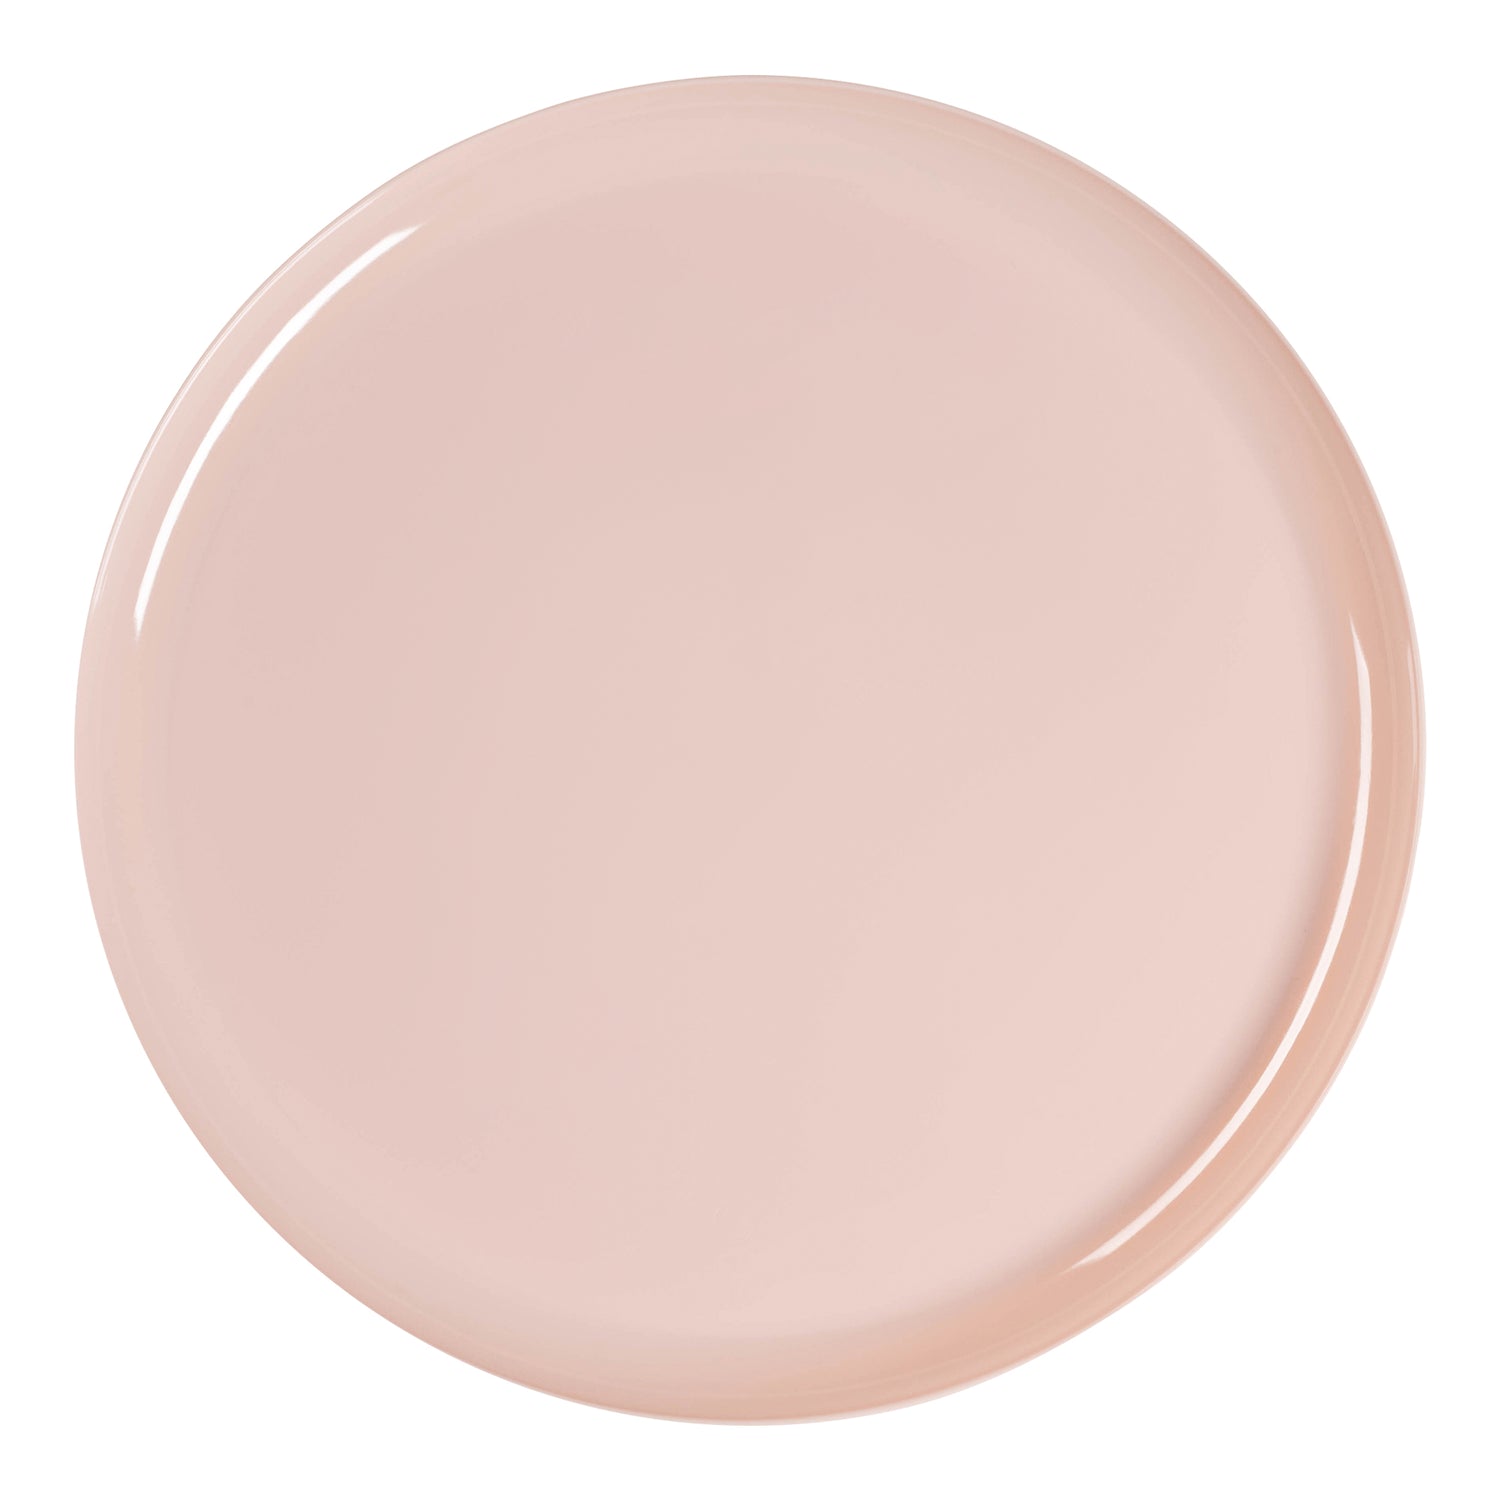 Pink Flat Round Disposable Plastic Appetizer/Salad Plates (8.5") | The Kaya Collection